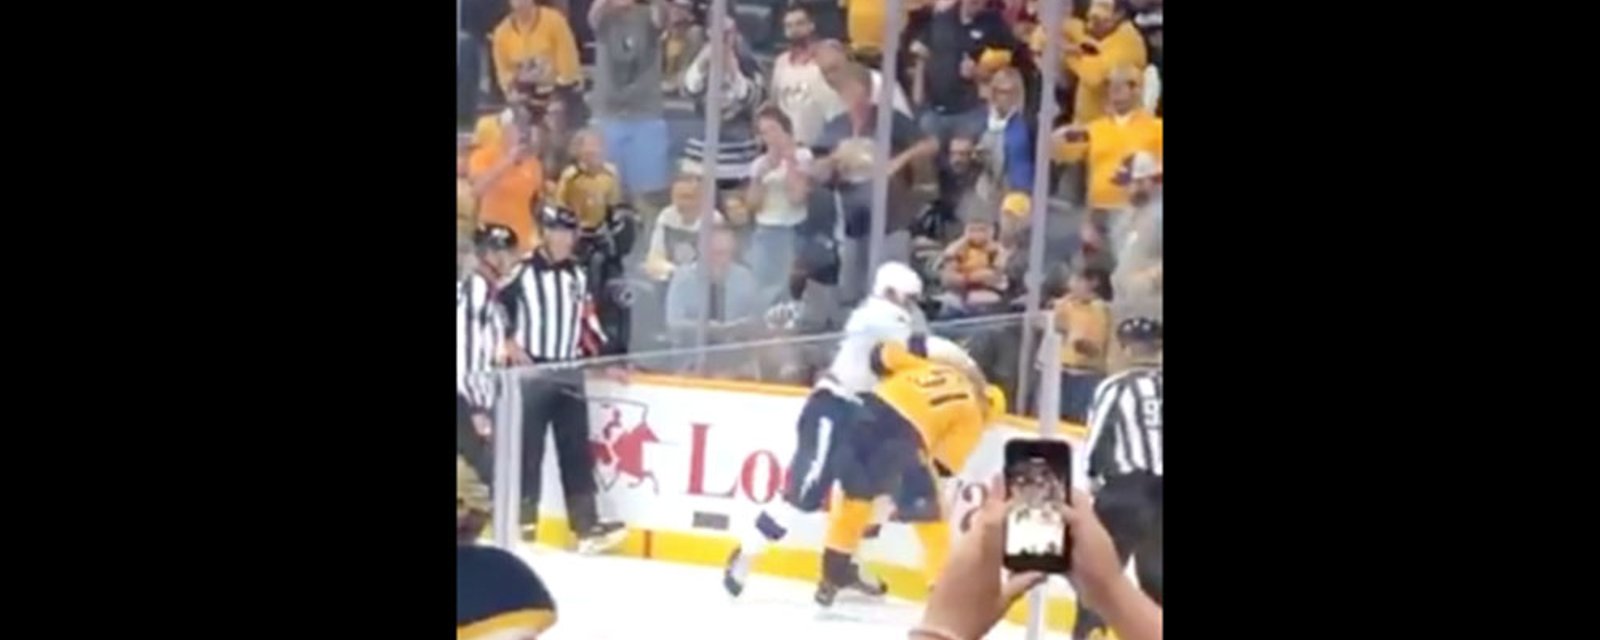 Maroon dusts Watson in a scrap then shows off his Stanley Cup ring to the Preds bench